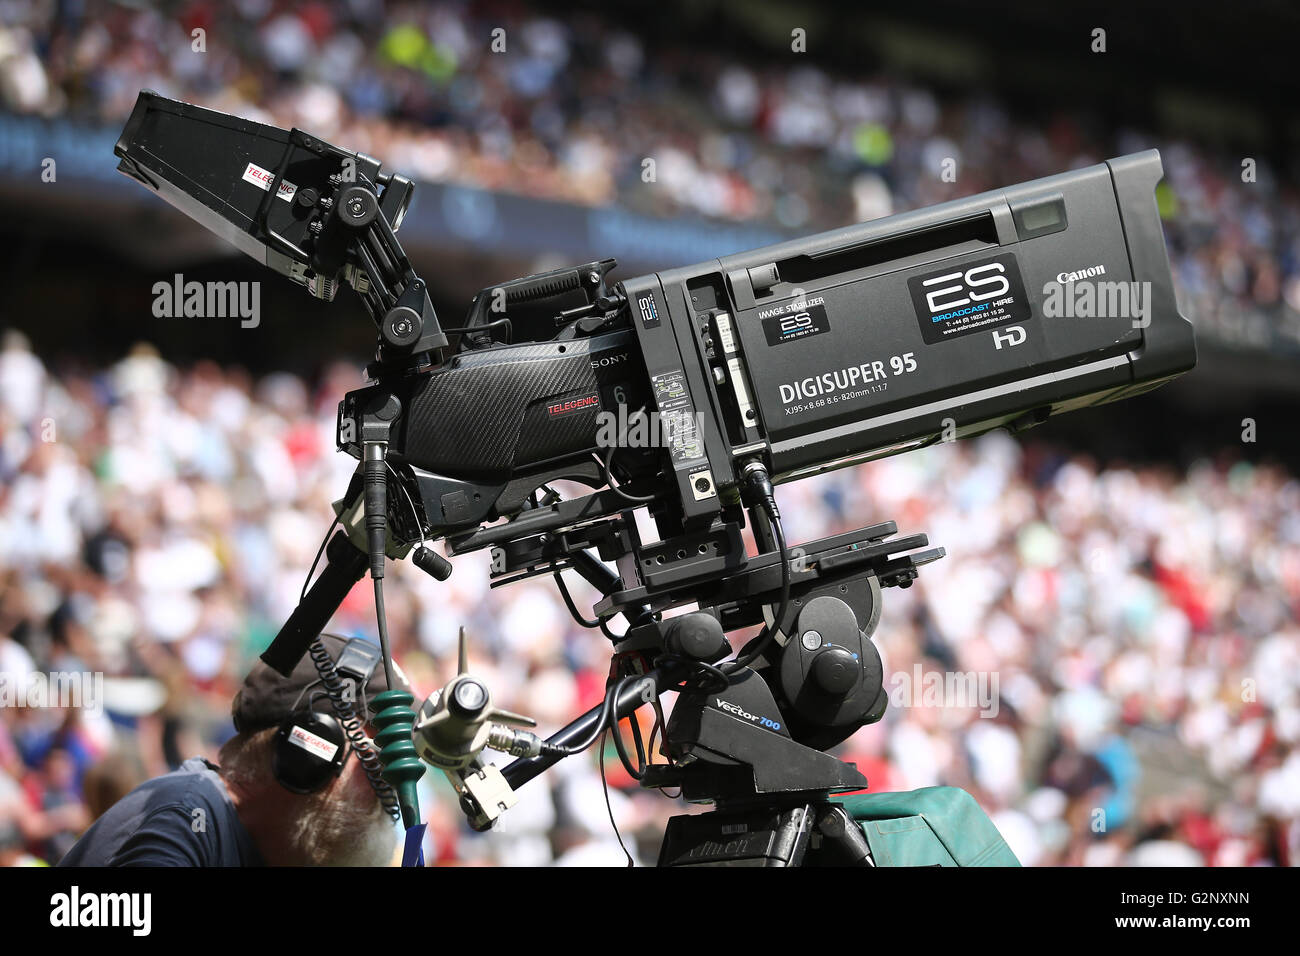 A broadcast television camera is pictured at a rugby match. London. UK. Stock Photo